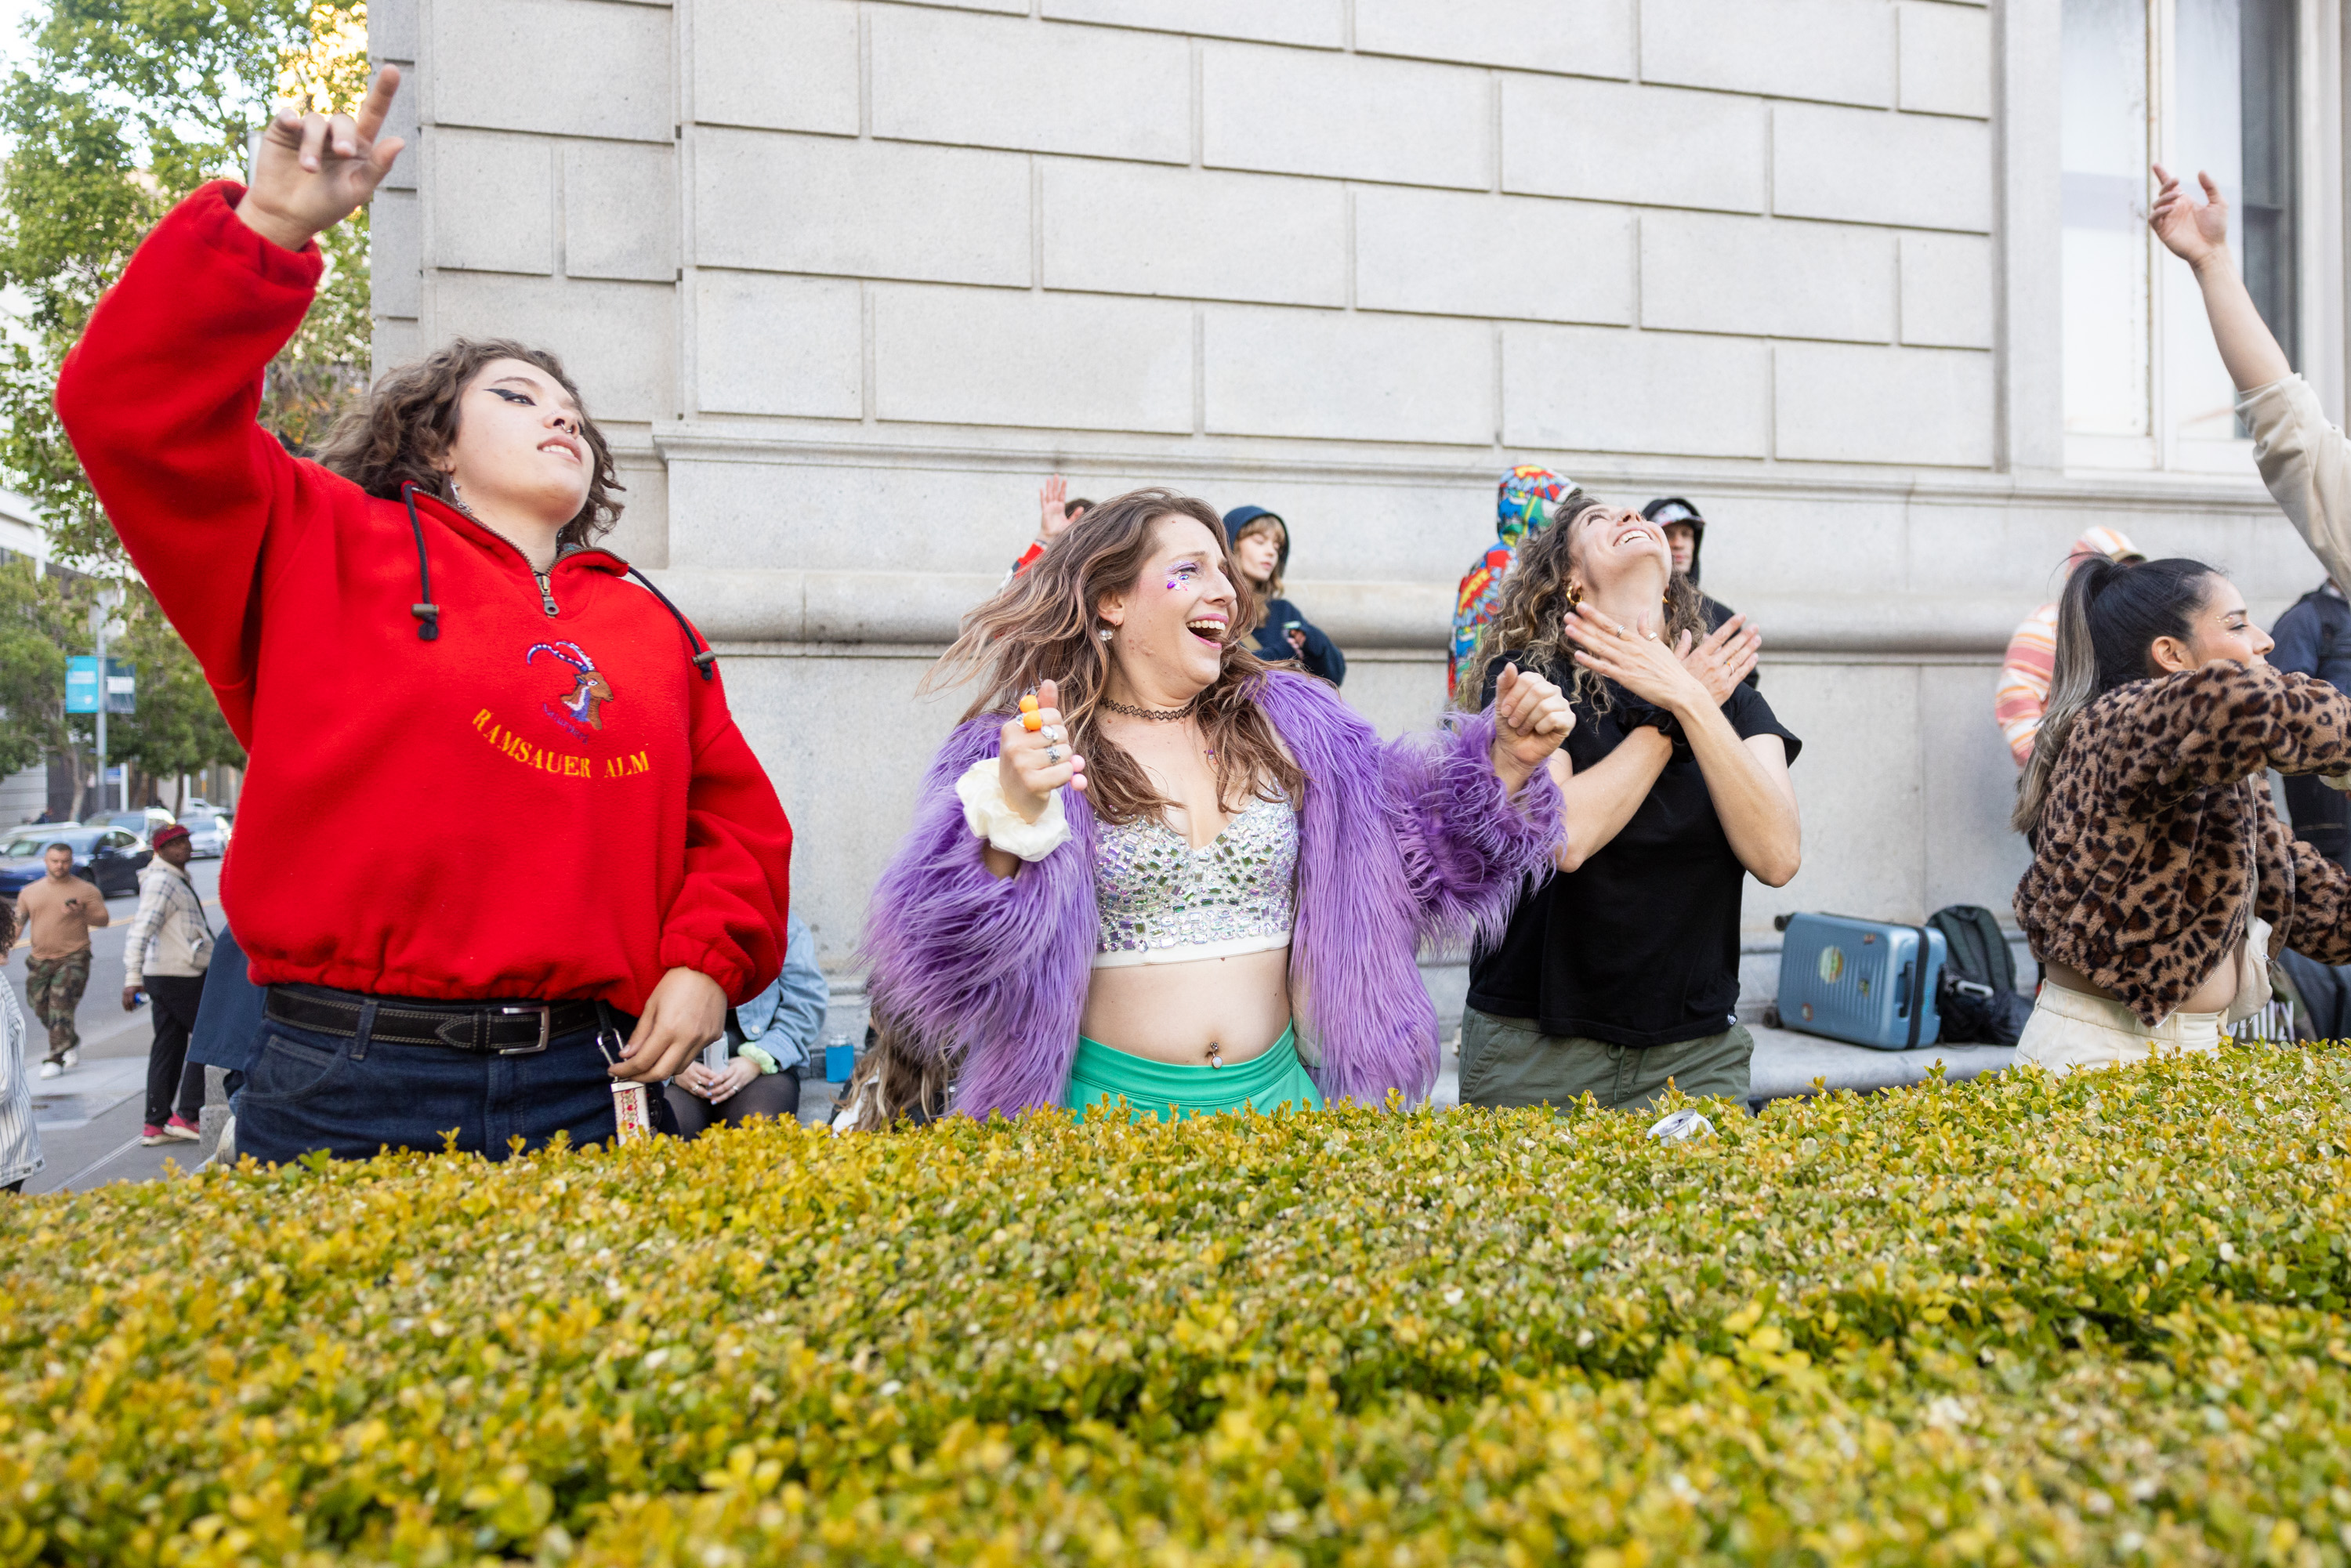 A group of joyous people dance energetically outside a large concrete building, some in colorful, furry coats, in front of green shrubbery.